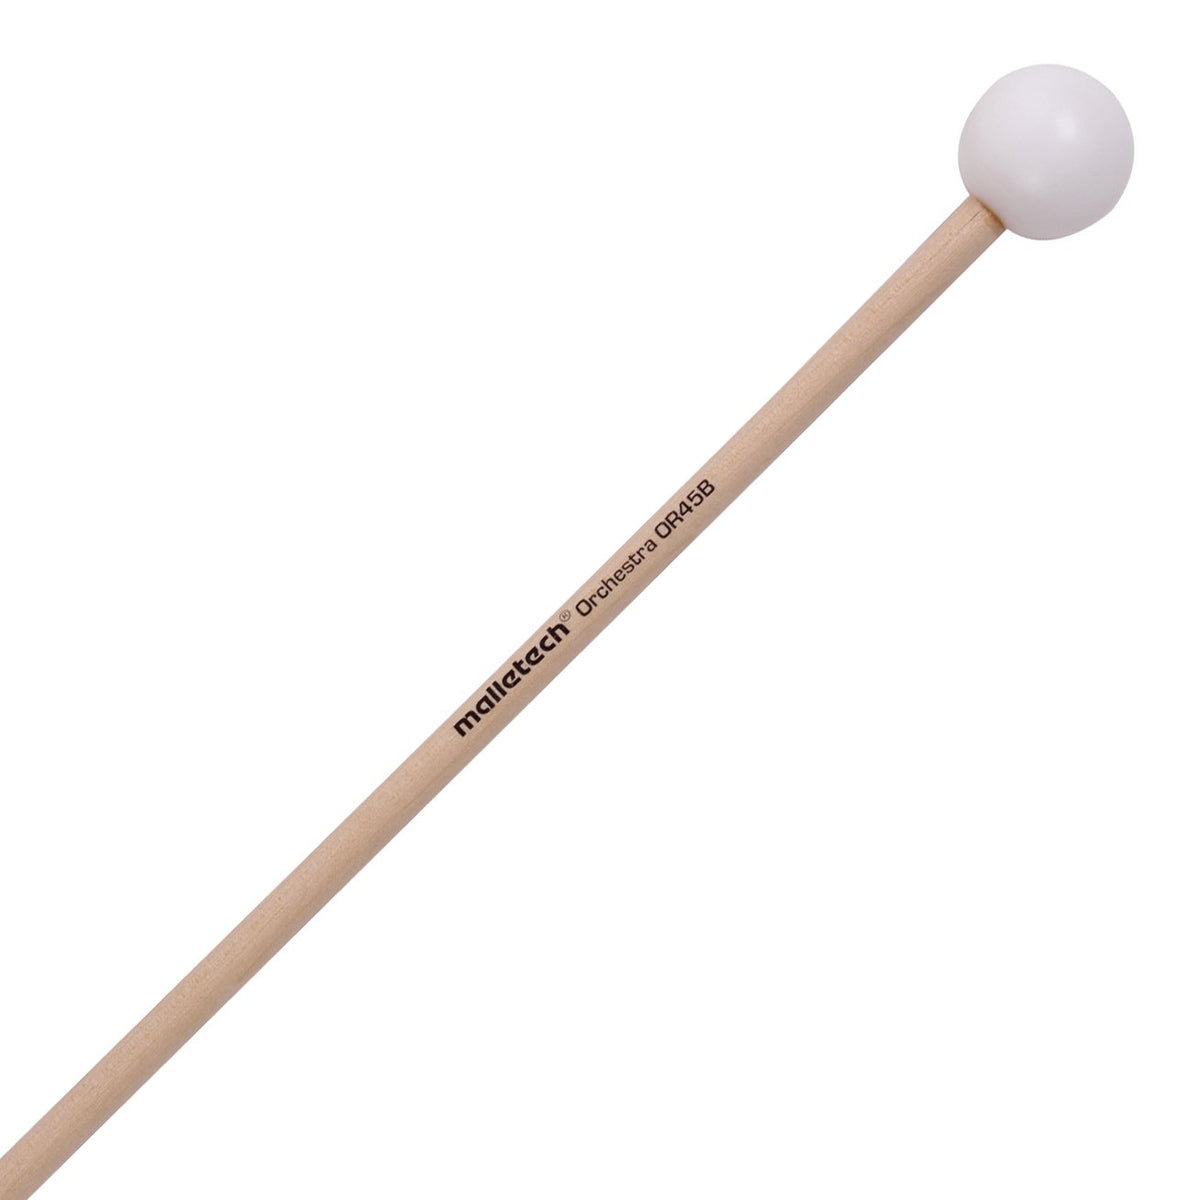 Malletech - New Orchestral Series Xylophone Mallets